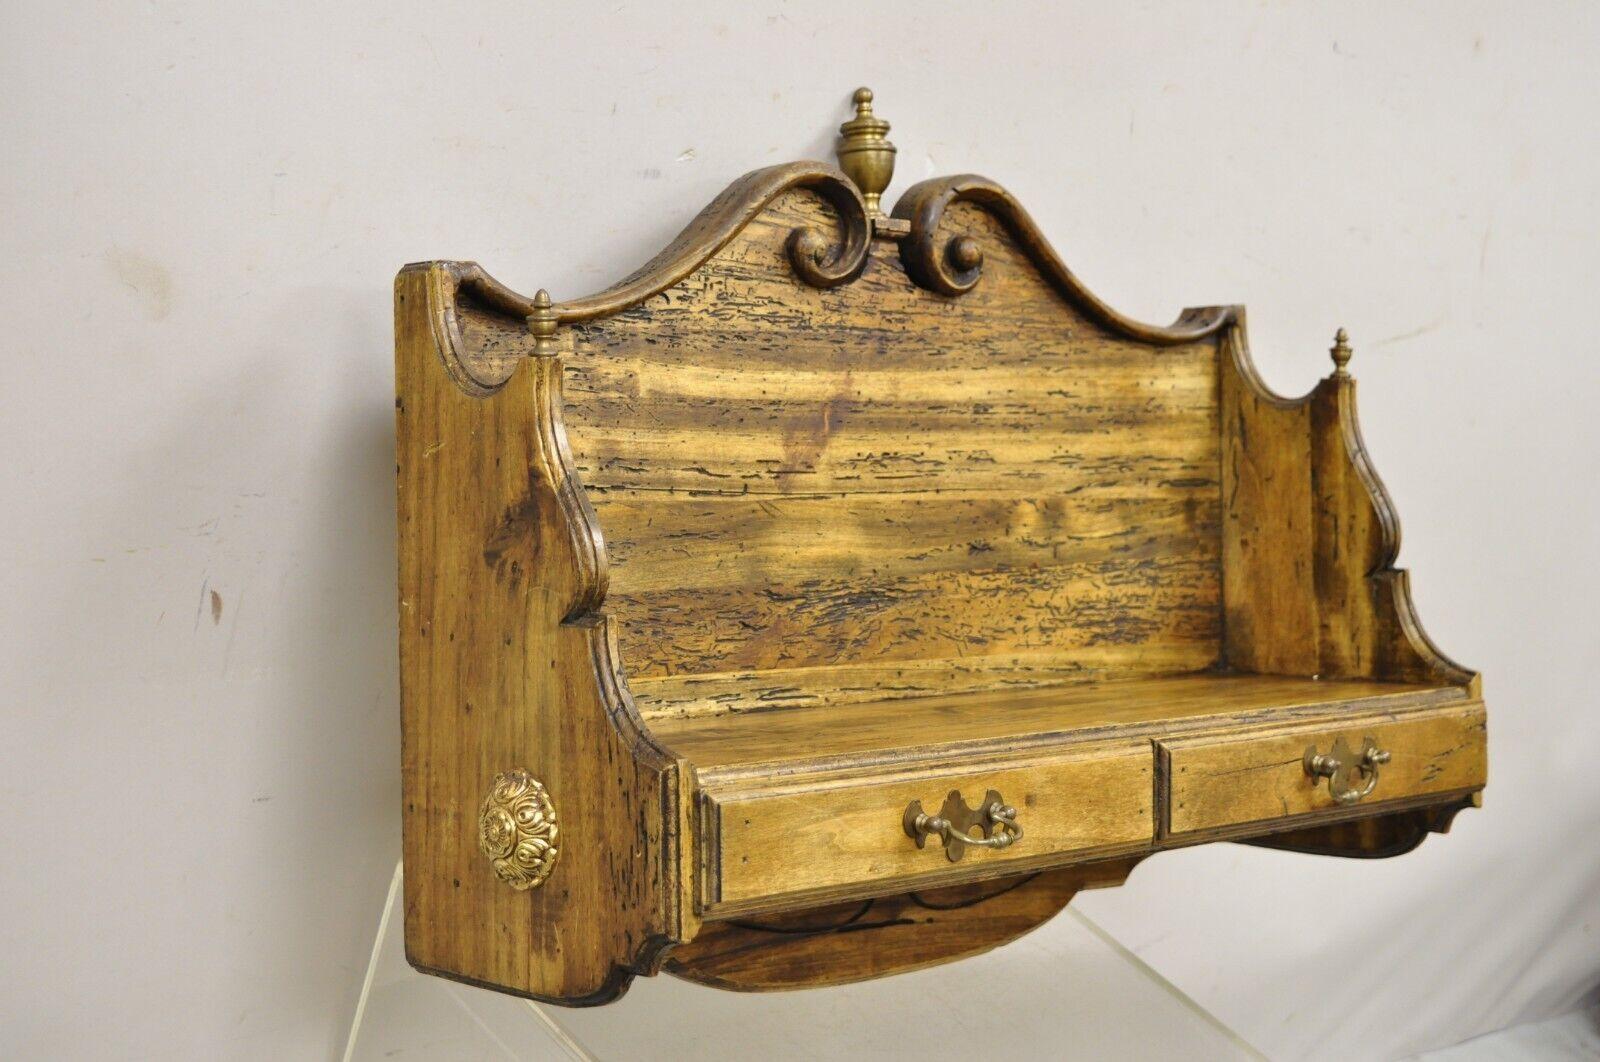 Vintage Italian Carved Wood Distressed French Country Wall Hanging Shelf Curio. Item features Two drawers, brass finials stamped, “Made in Italy”. Circa Late 20th Century. Measurements: 19.25